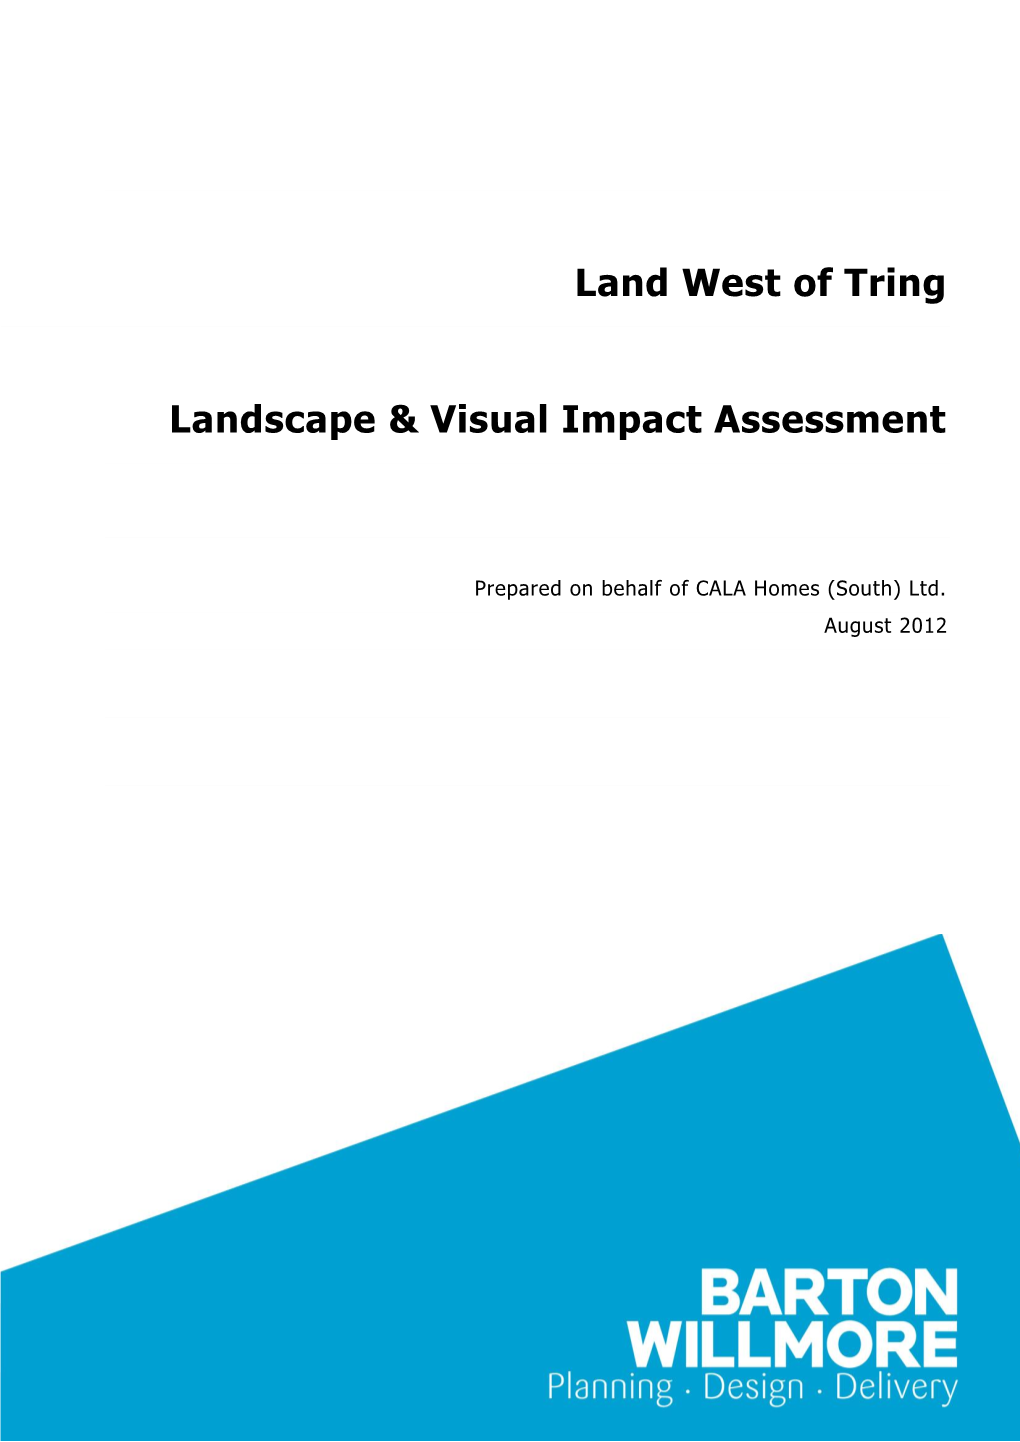 Land West of Tring Landscape & Visual Impact Assessment